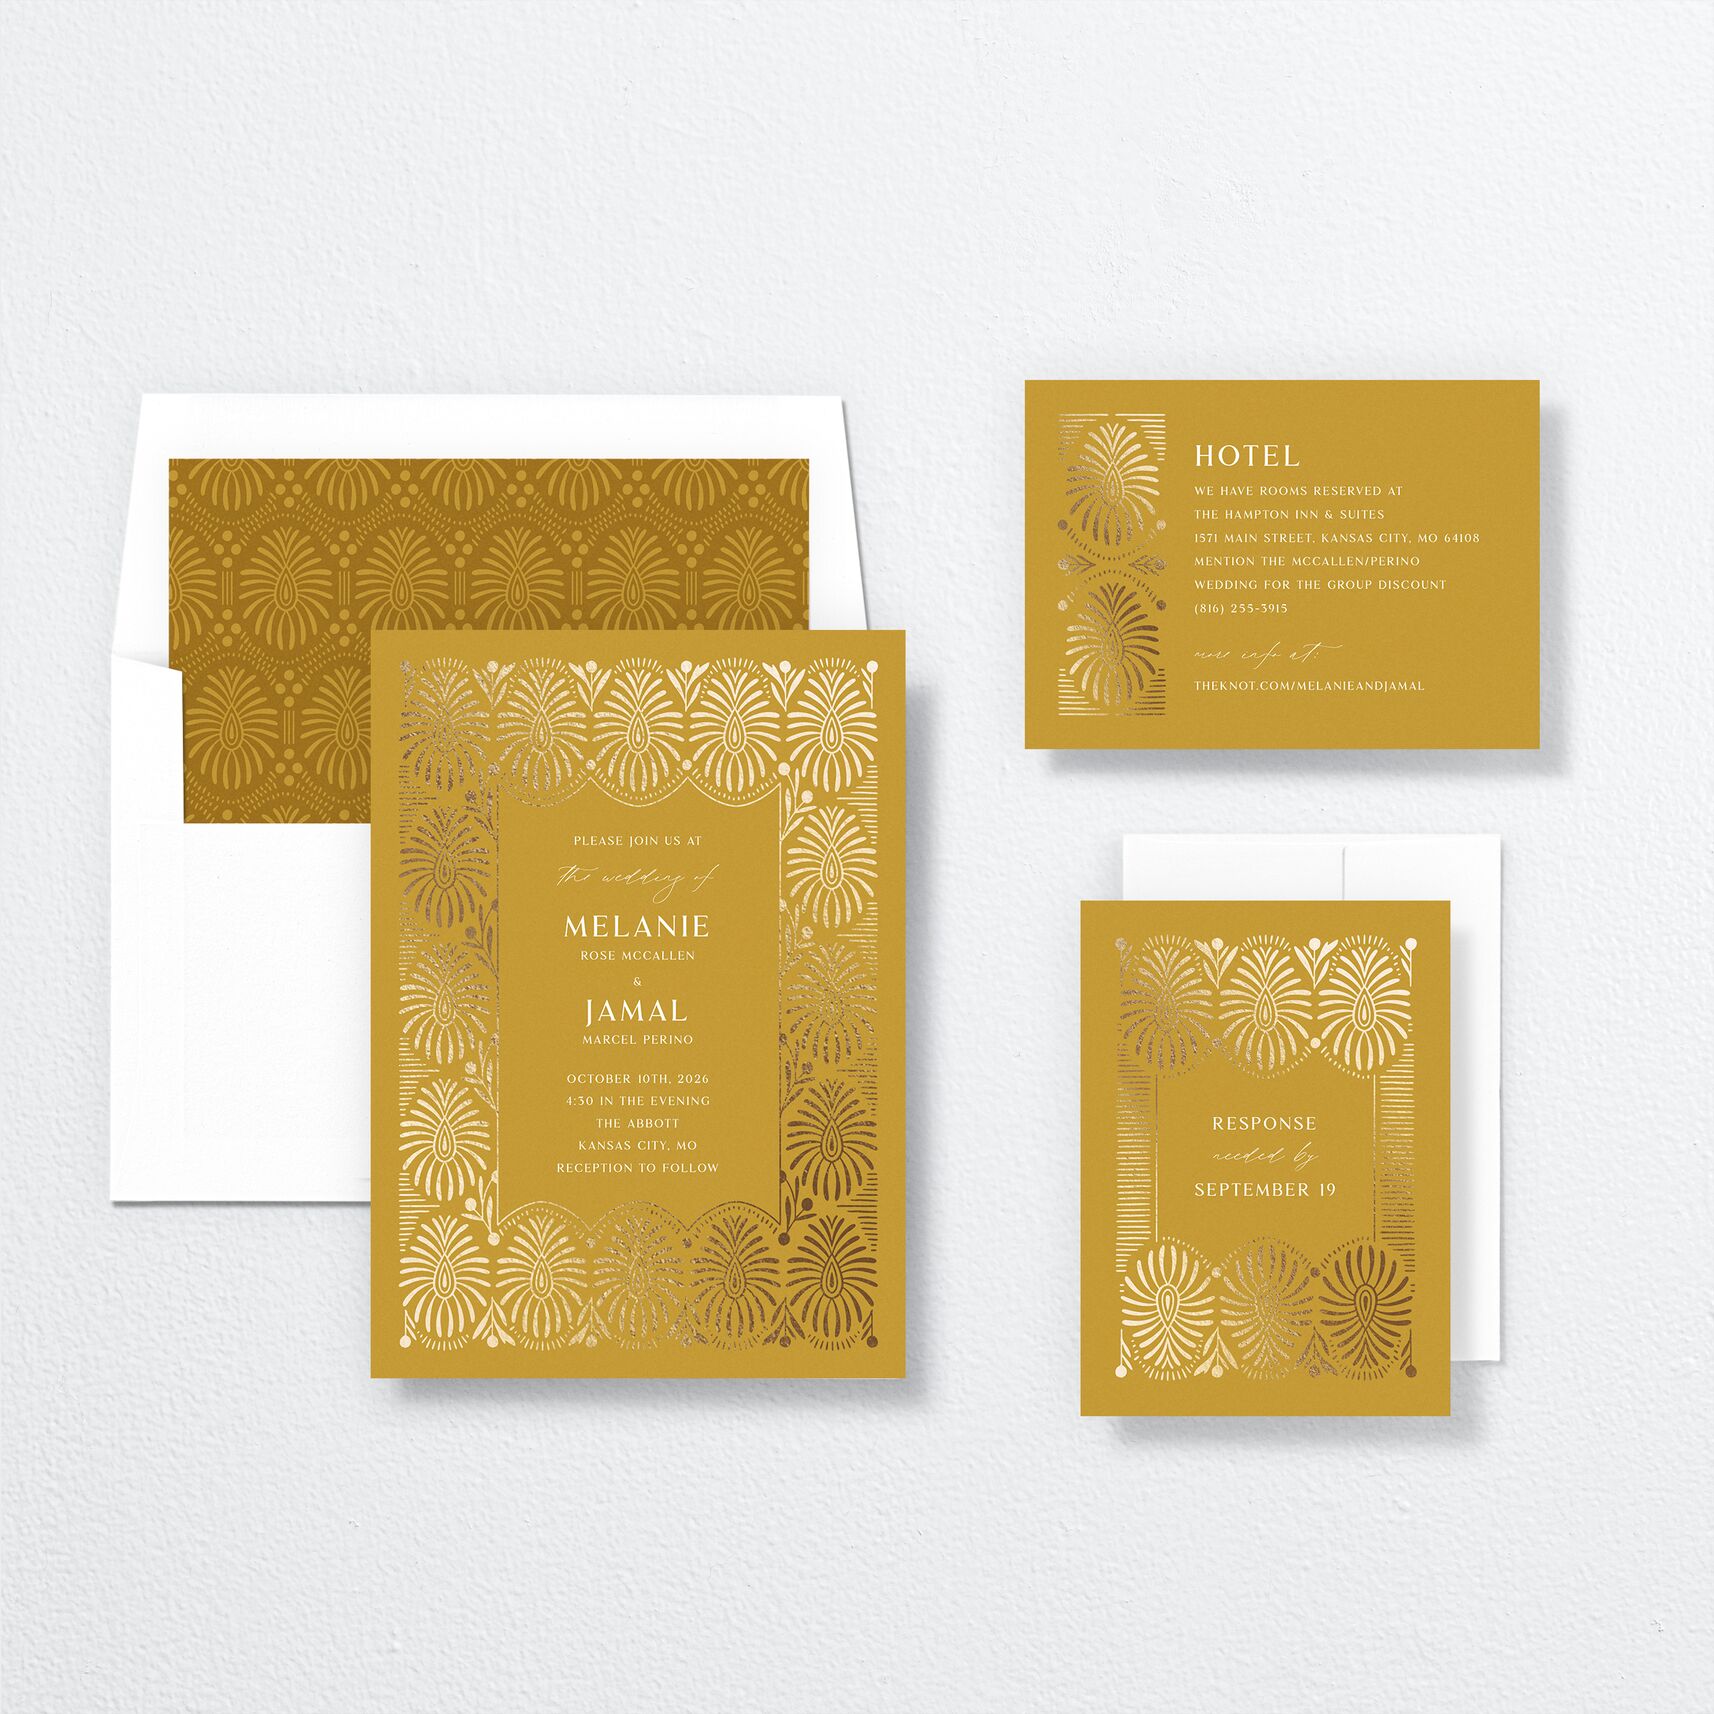 Woven Frame Wedding Invitations suite in yellow